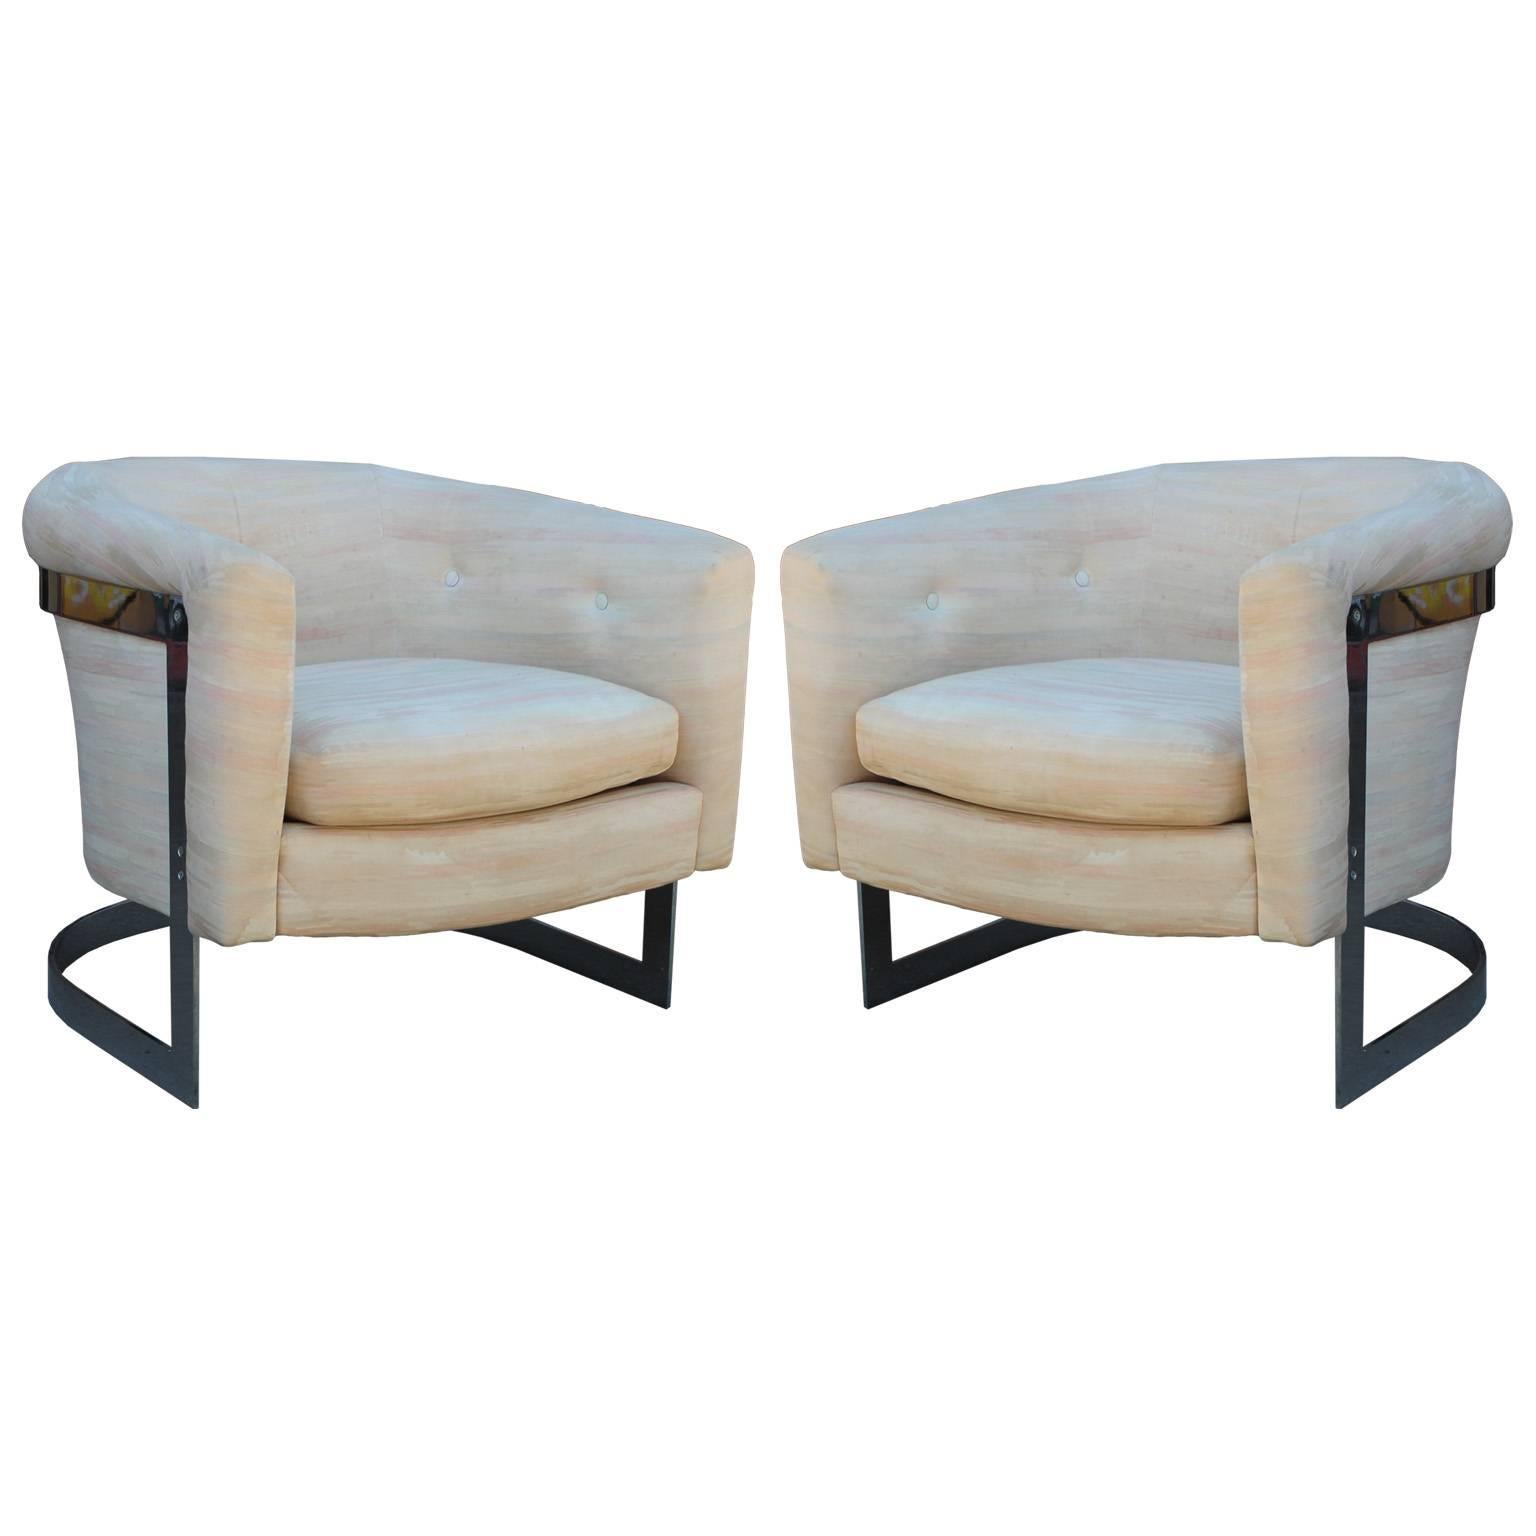  Pair of Modern Milo Baughman Chrome Cantilevered Barrel Lounge Chairs